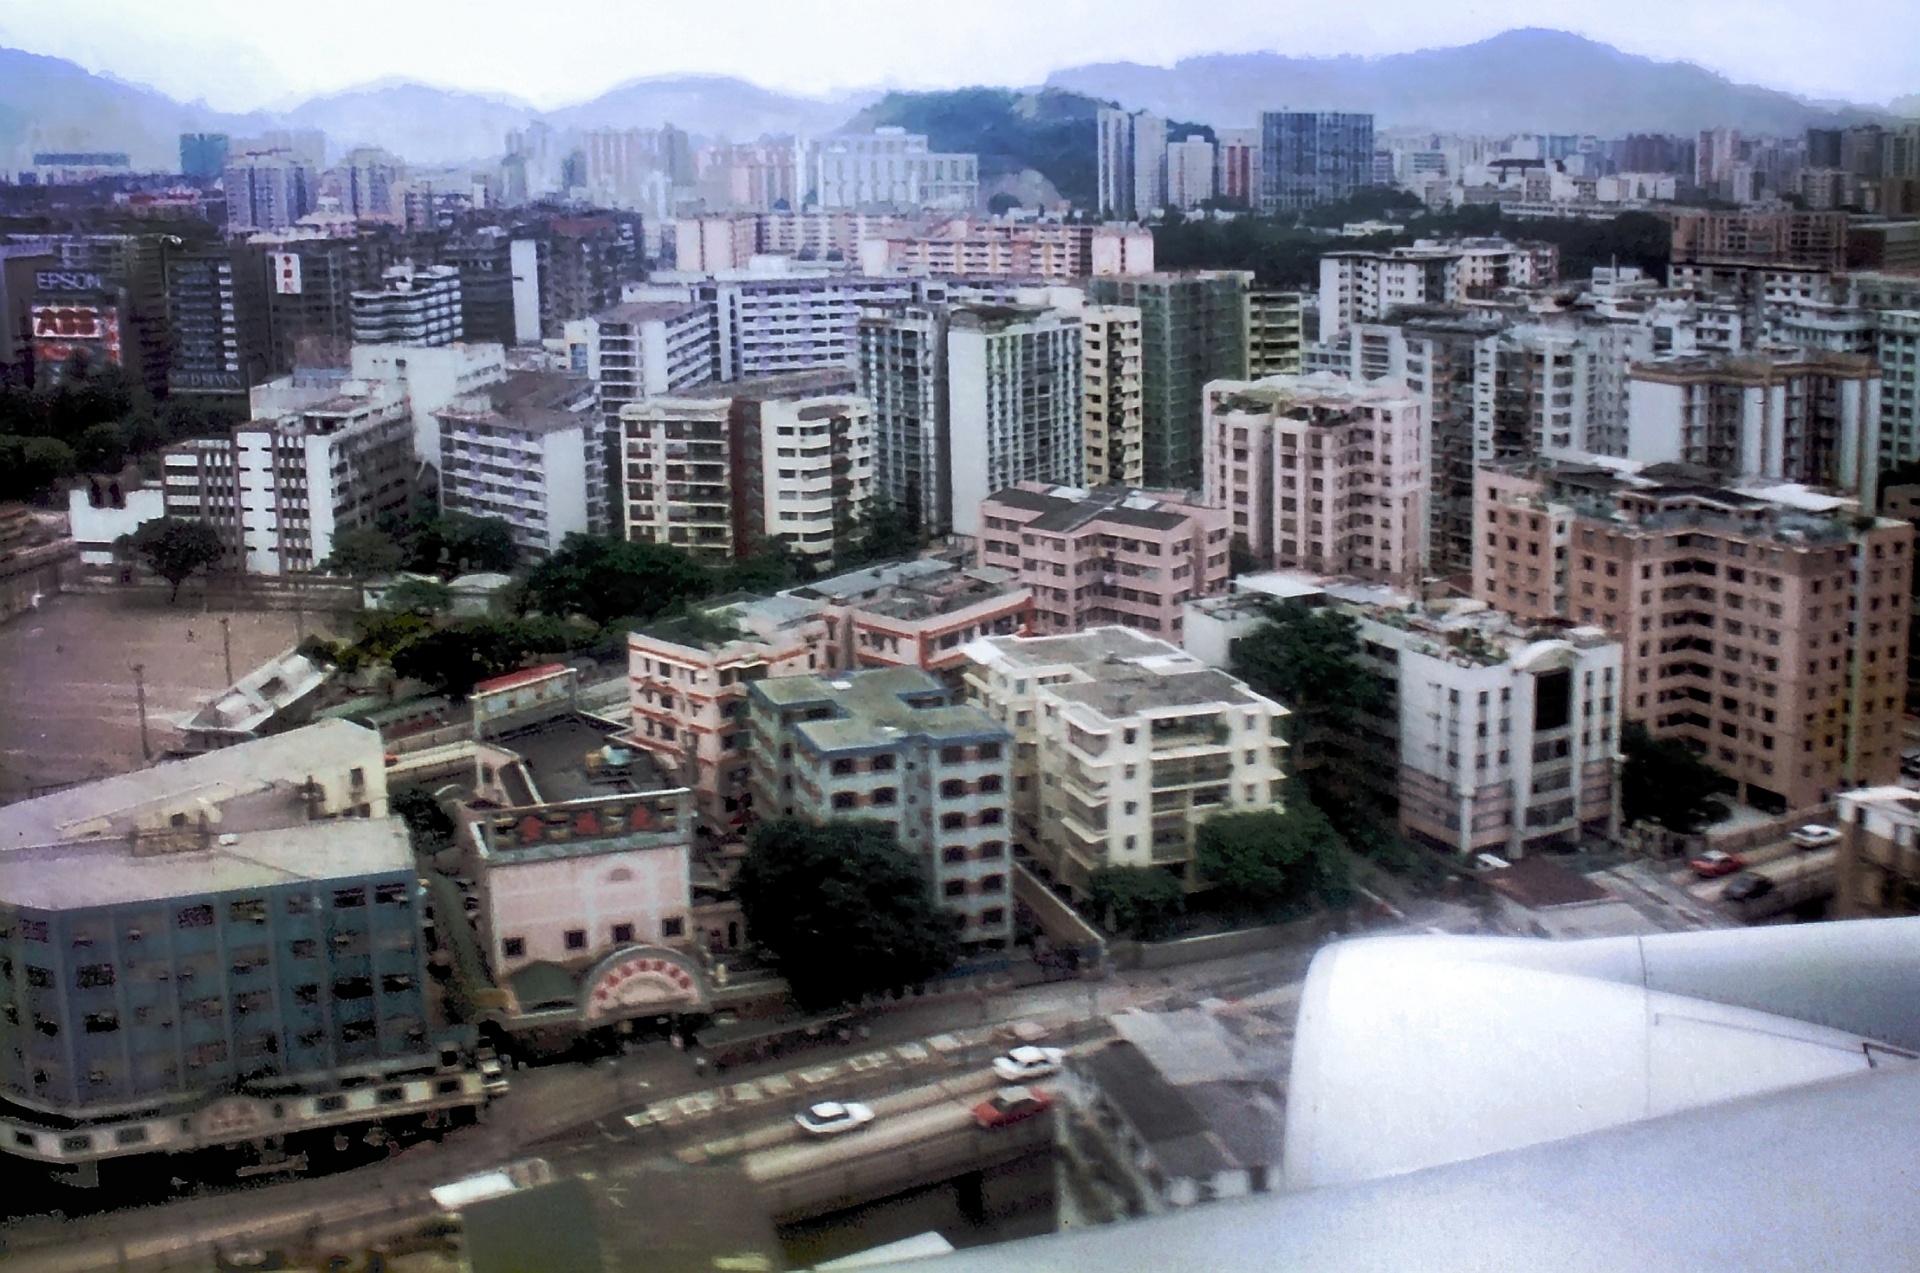 Plane coming in to land at the former Kai Tak International Airport. At less than 150 metres, shop signs are clearly visible. In front of the pink building towards the bottom left of the picture a bus stop can even be seen, with people waiting at it.